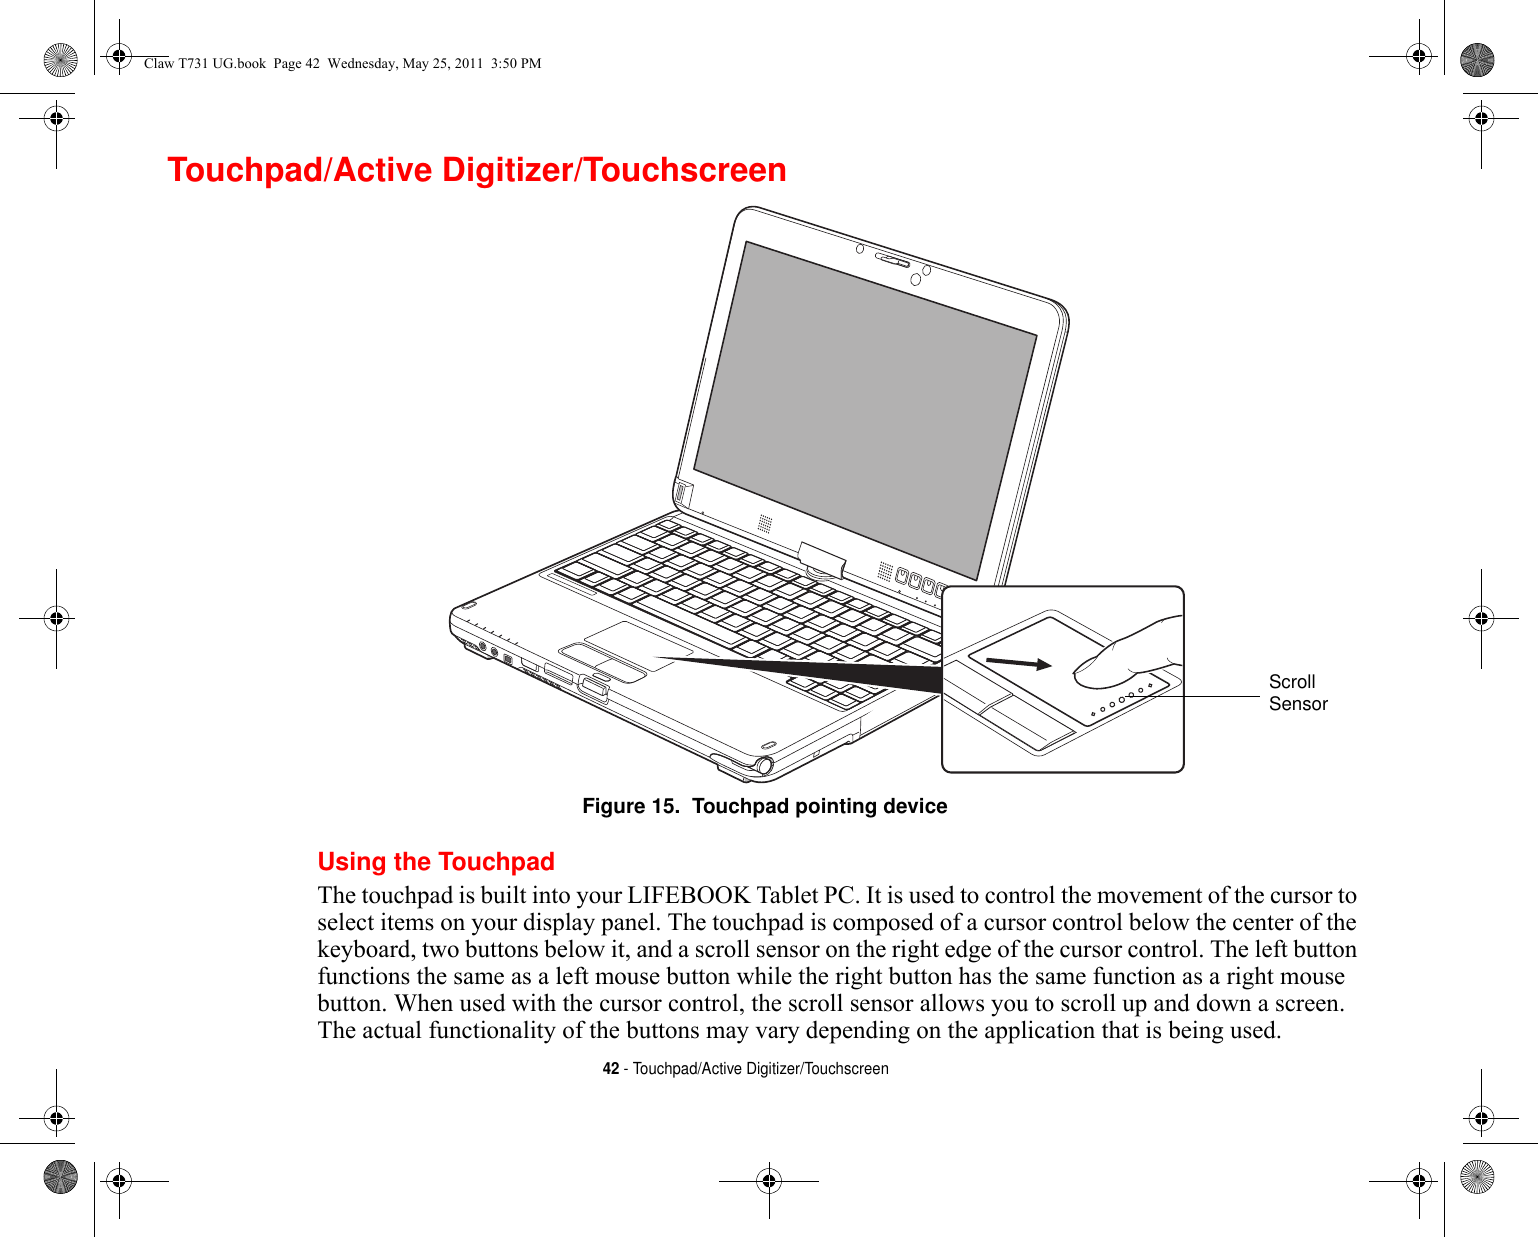 42 - Touchpad/Active Digitizer/TouchscreenTouchpad/Active Digitizer/TouchscreenFigure 15.  Touchpad pointing deviceUsing the TouchpadThe touchpad is built into your LIFEBOOK Tablet PC. It is used to control the movement of the cursor to select items on your display panel. The touchpad is composed of a cursor control below the center of the keyboard, two buttons below it, and a scroll sensor on the right edge of the cursor control. The left button functions the same as a left mouse button while the right button has the same function as a right mouse button. When used with the cursor control, the scroll sensor allows you to scroll up and down a screen. The actual functionality of the buttons may vary depending on the application that is being used.ScrollSensorClaw T731 UG.book  Page 42  Wednesday, May 25, 2011  3:50 PM